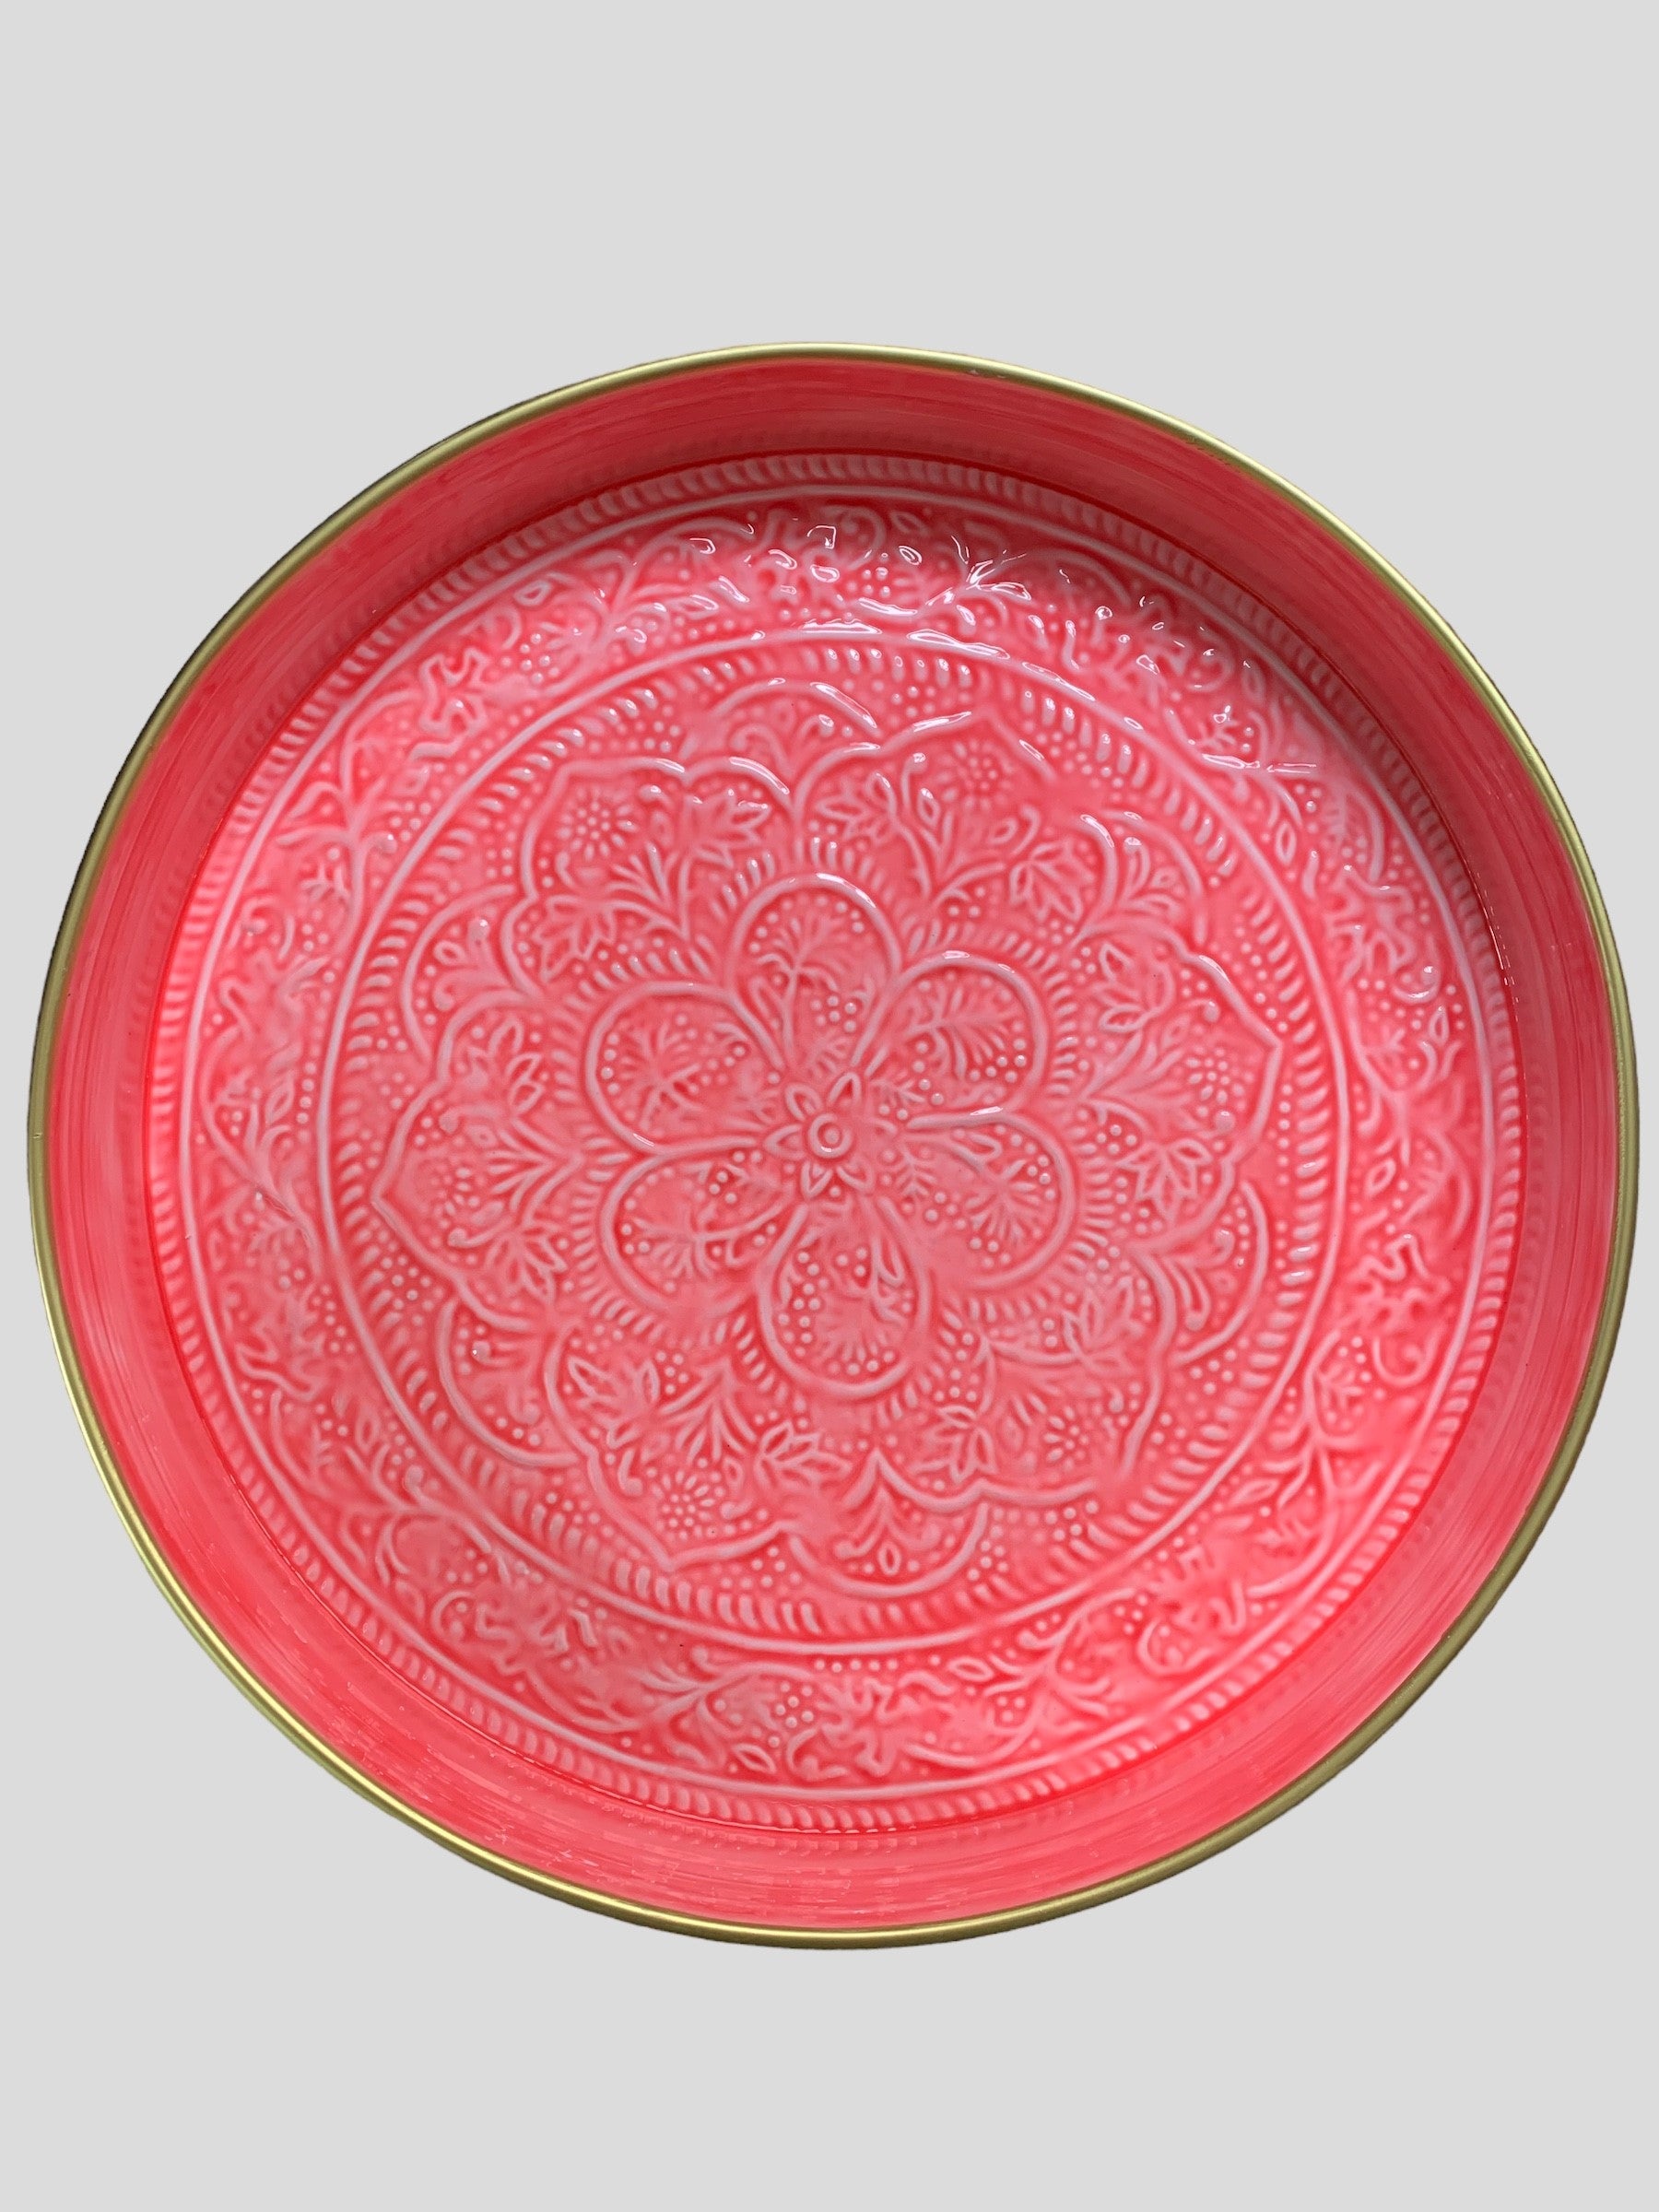 A large bright pink enamel tray from India